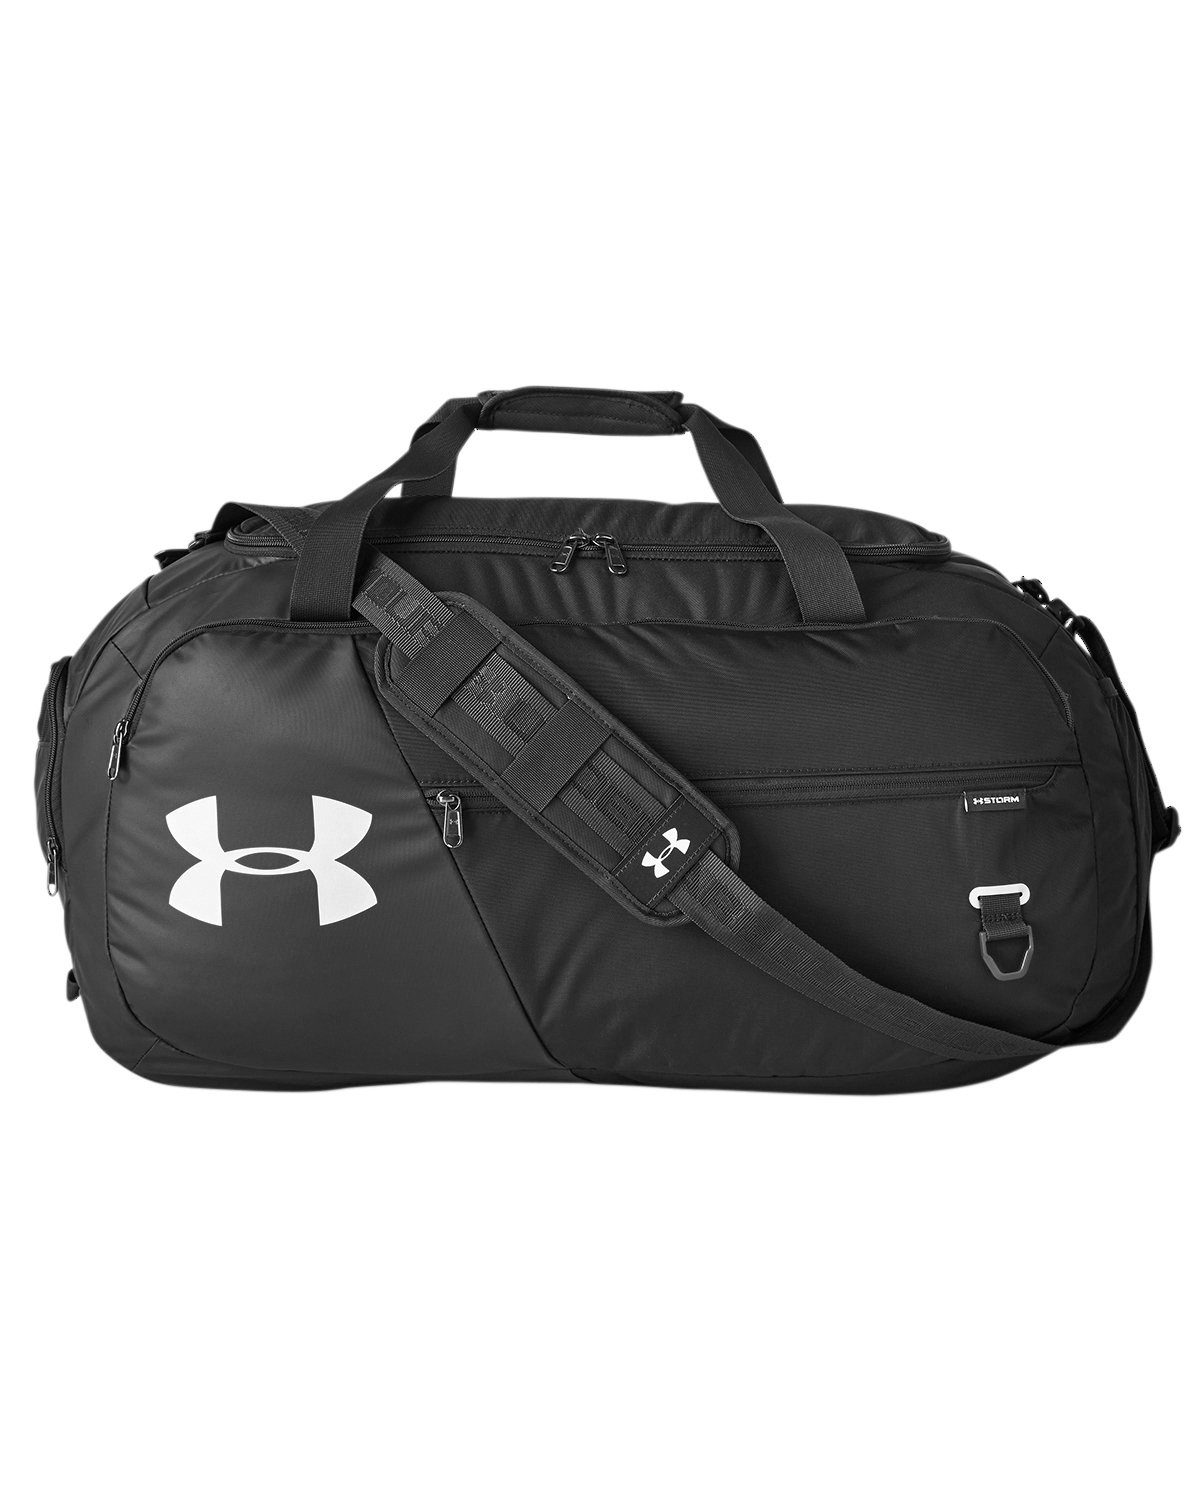 Under Armour Undeniable Large Duffle